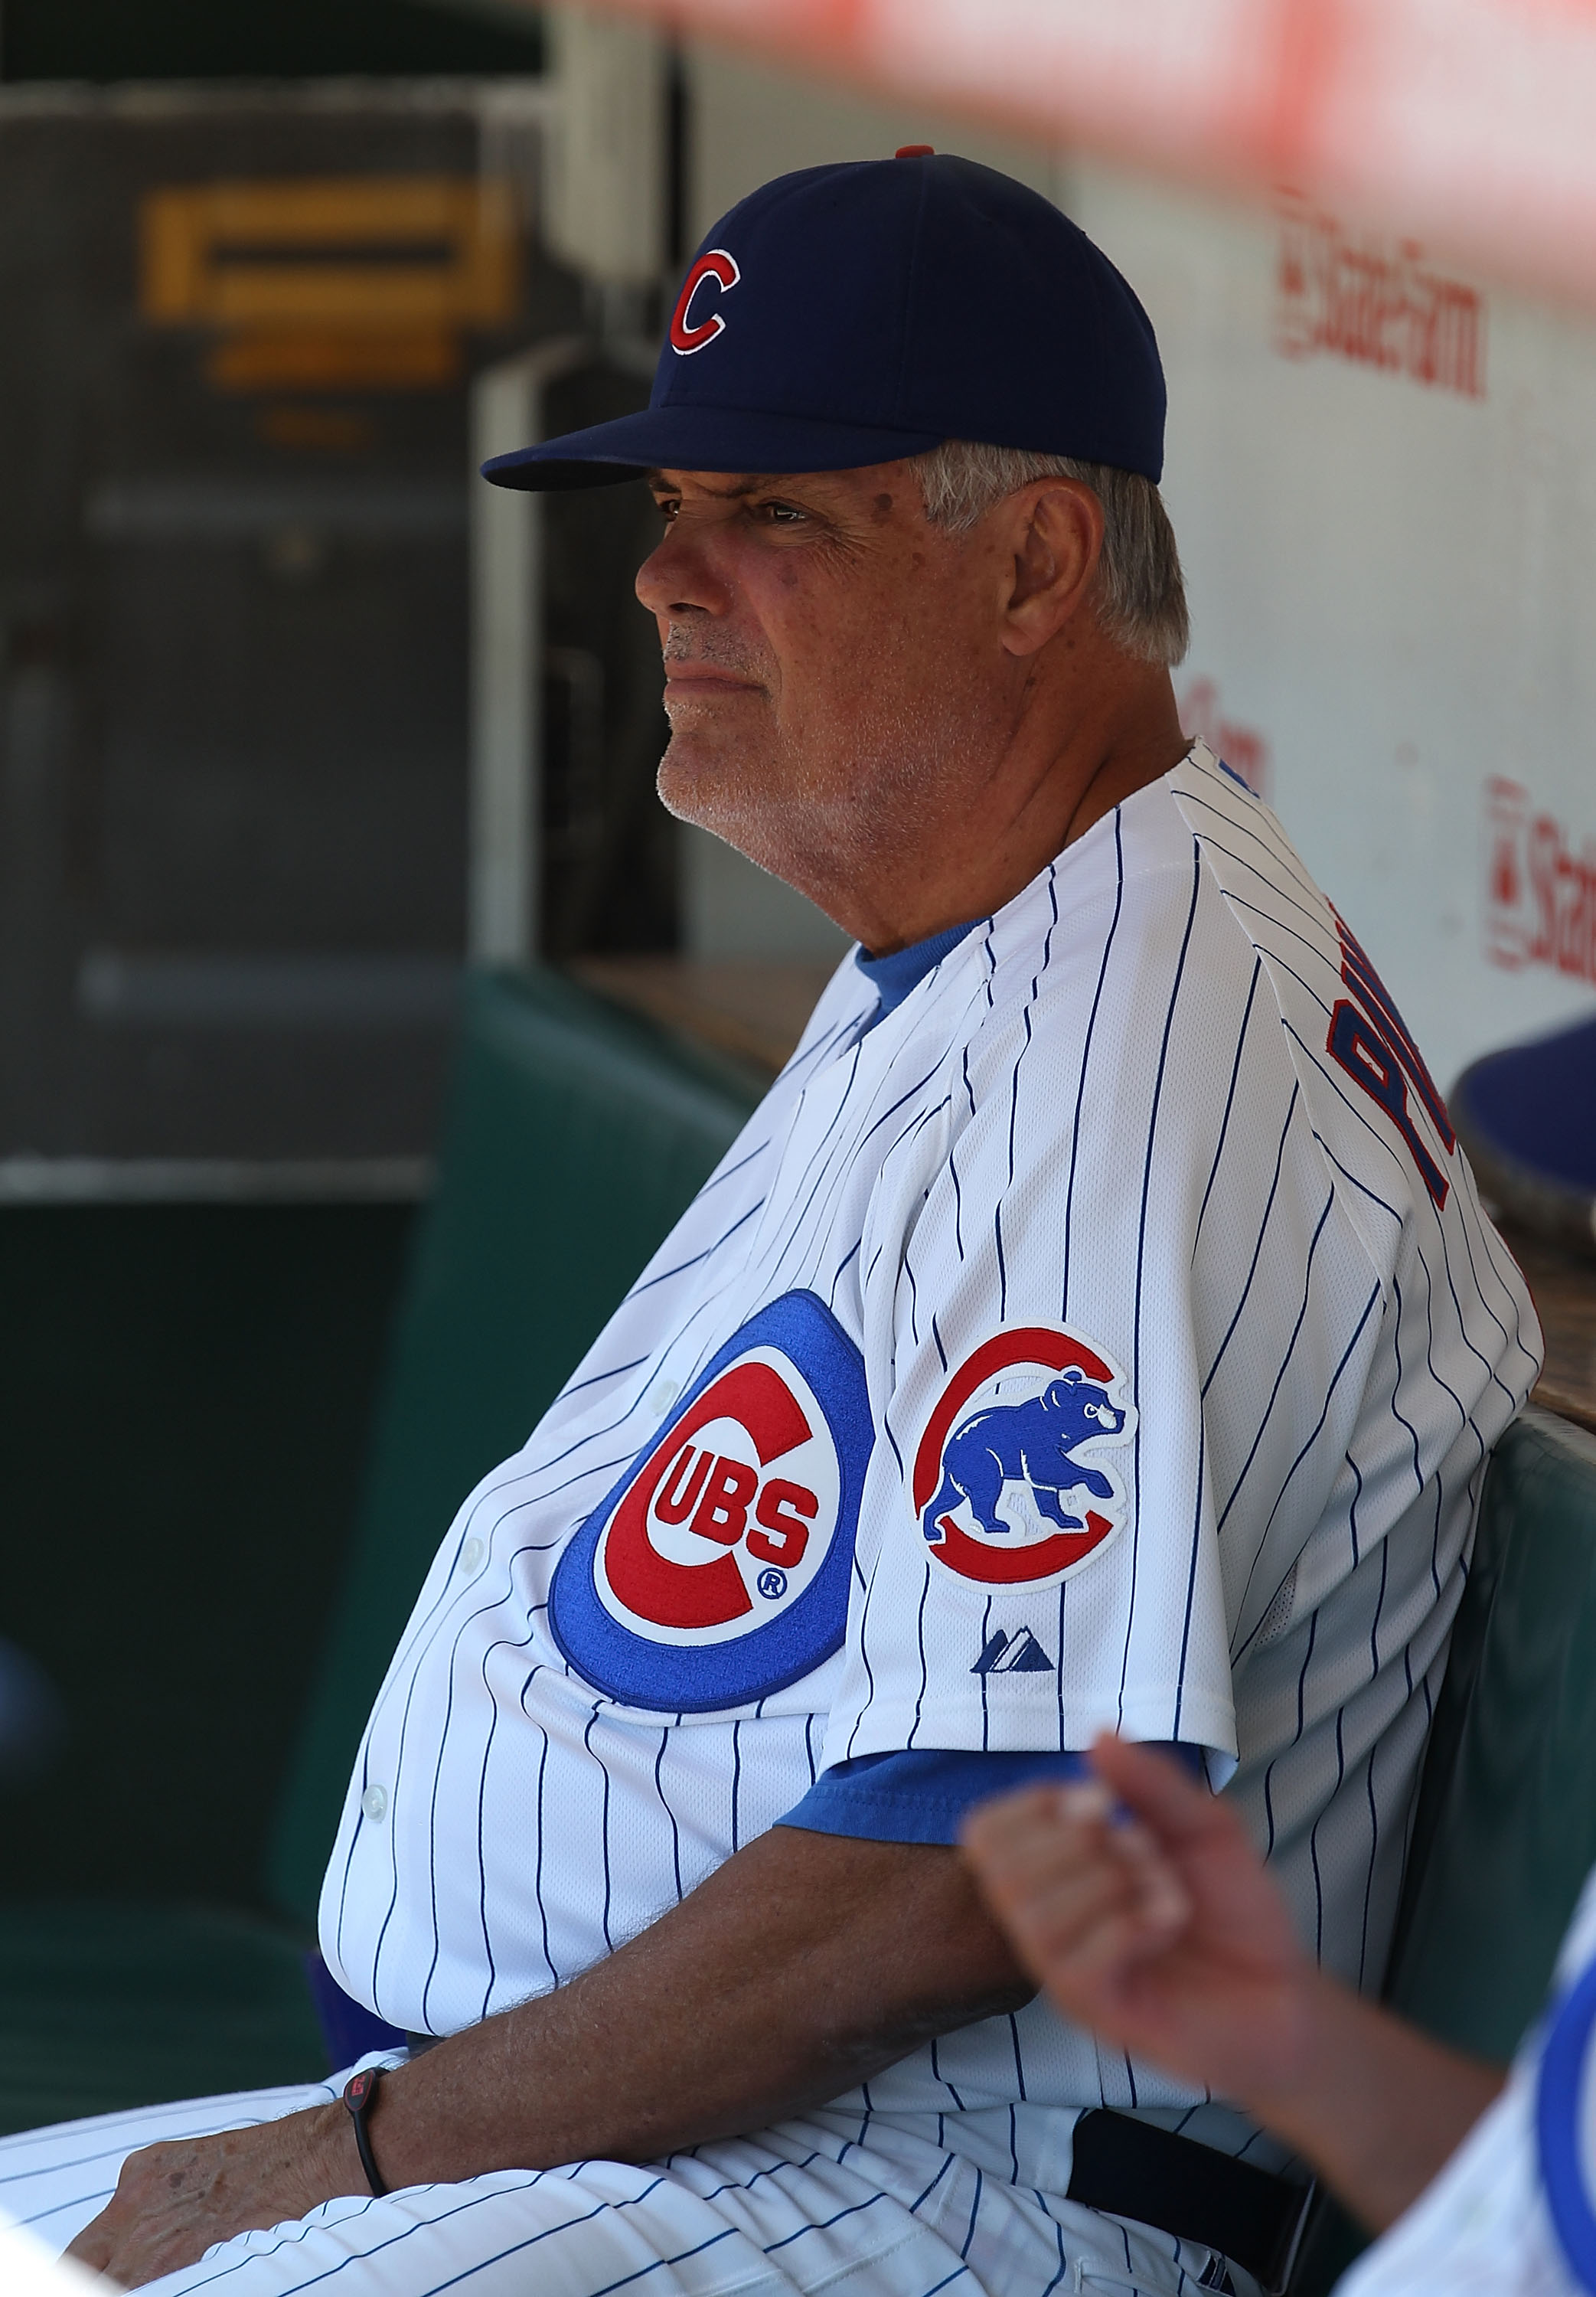 CHICAGO - JULY 21: Manager Lou Piniella #41 of the Chicago Cubs sits in the dugout before a game against the Houston Astros at Wrigley Field on July 21, 2010 in Chicago, Illinois. (Photo by Jonathan Daniel/Getty Images)